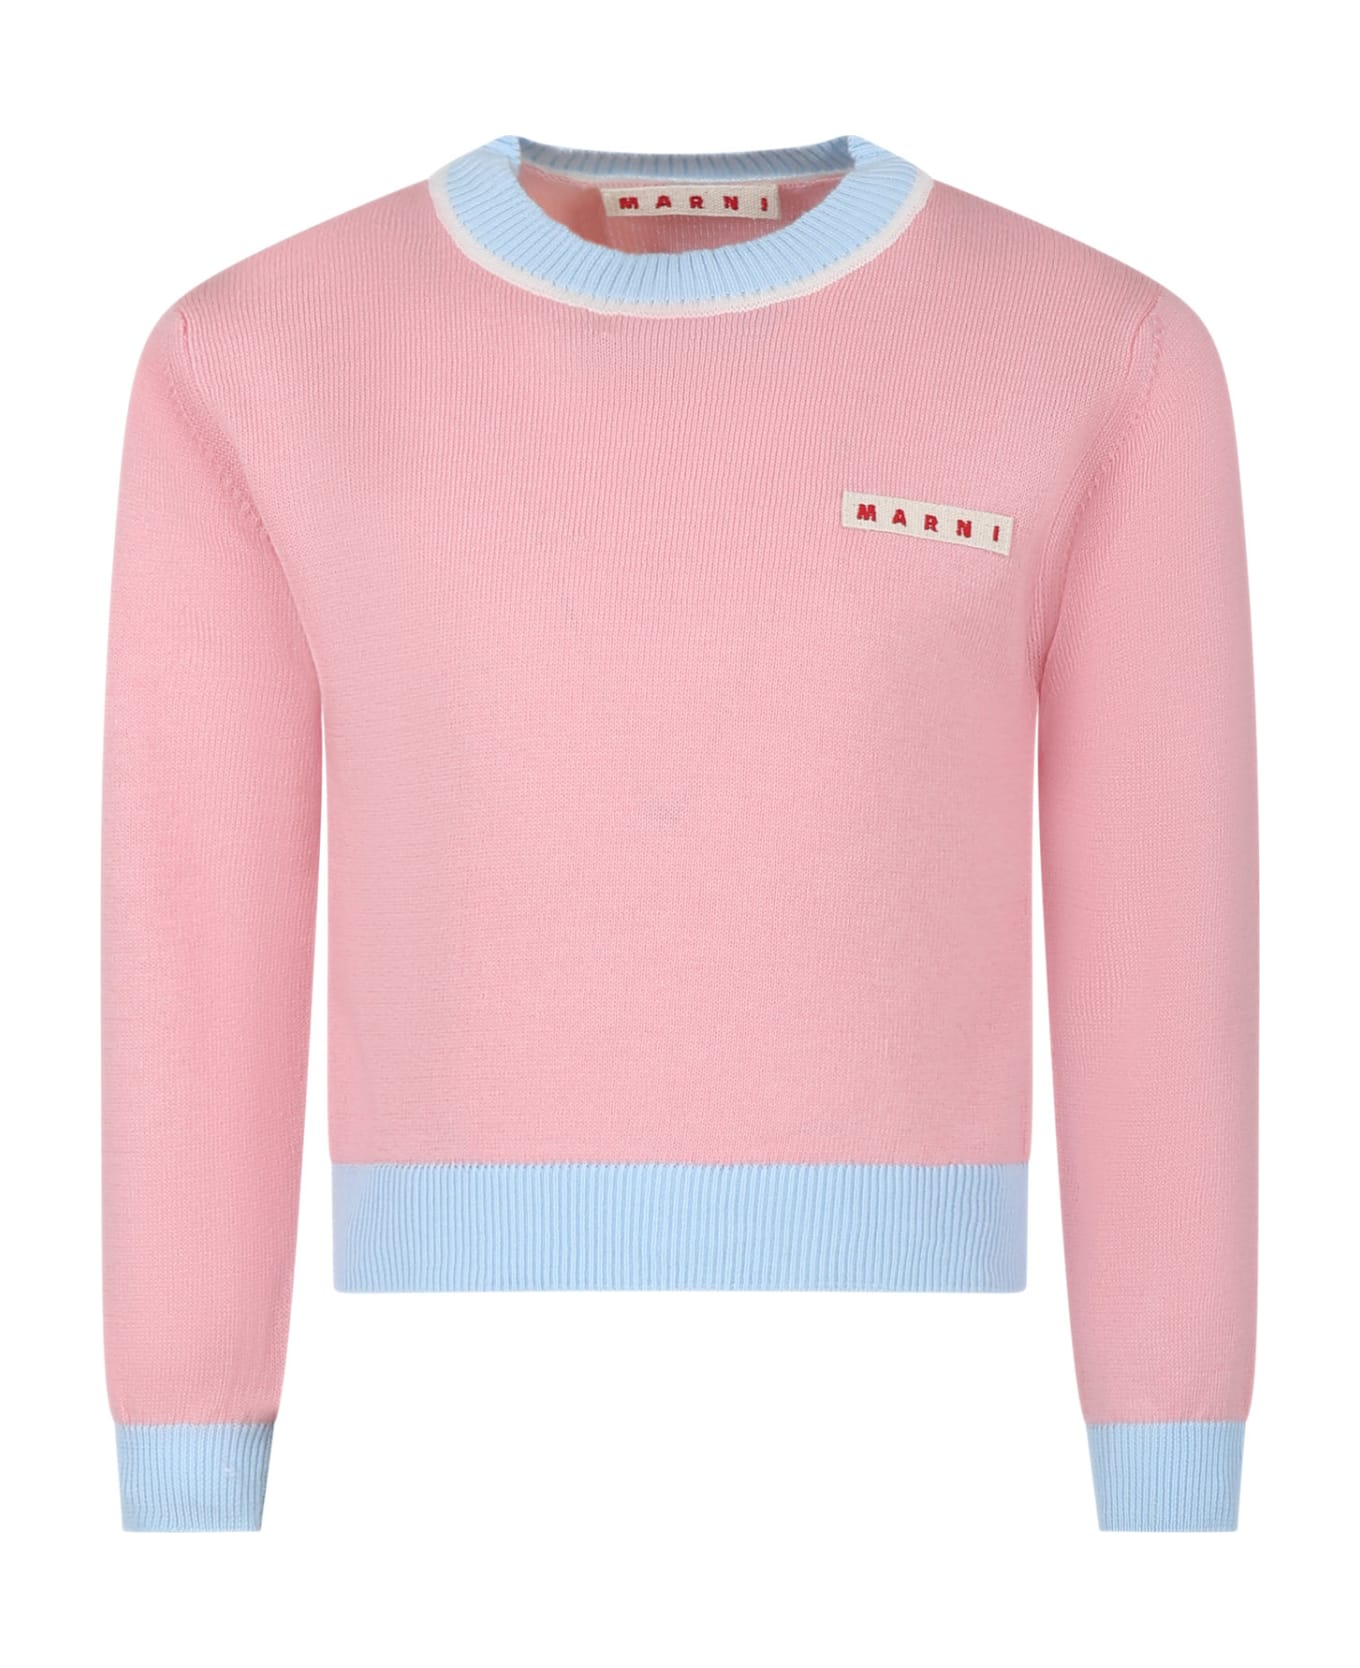 Marni Pink Sweat For Girl With Logo - Pink